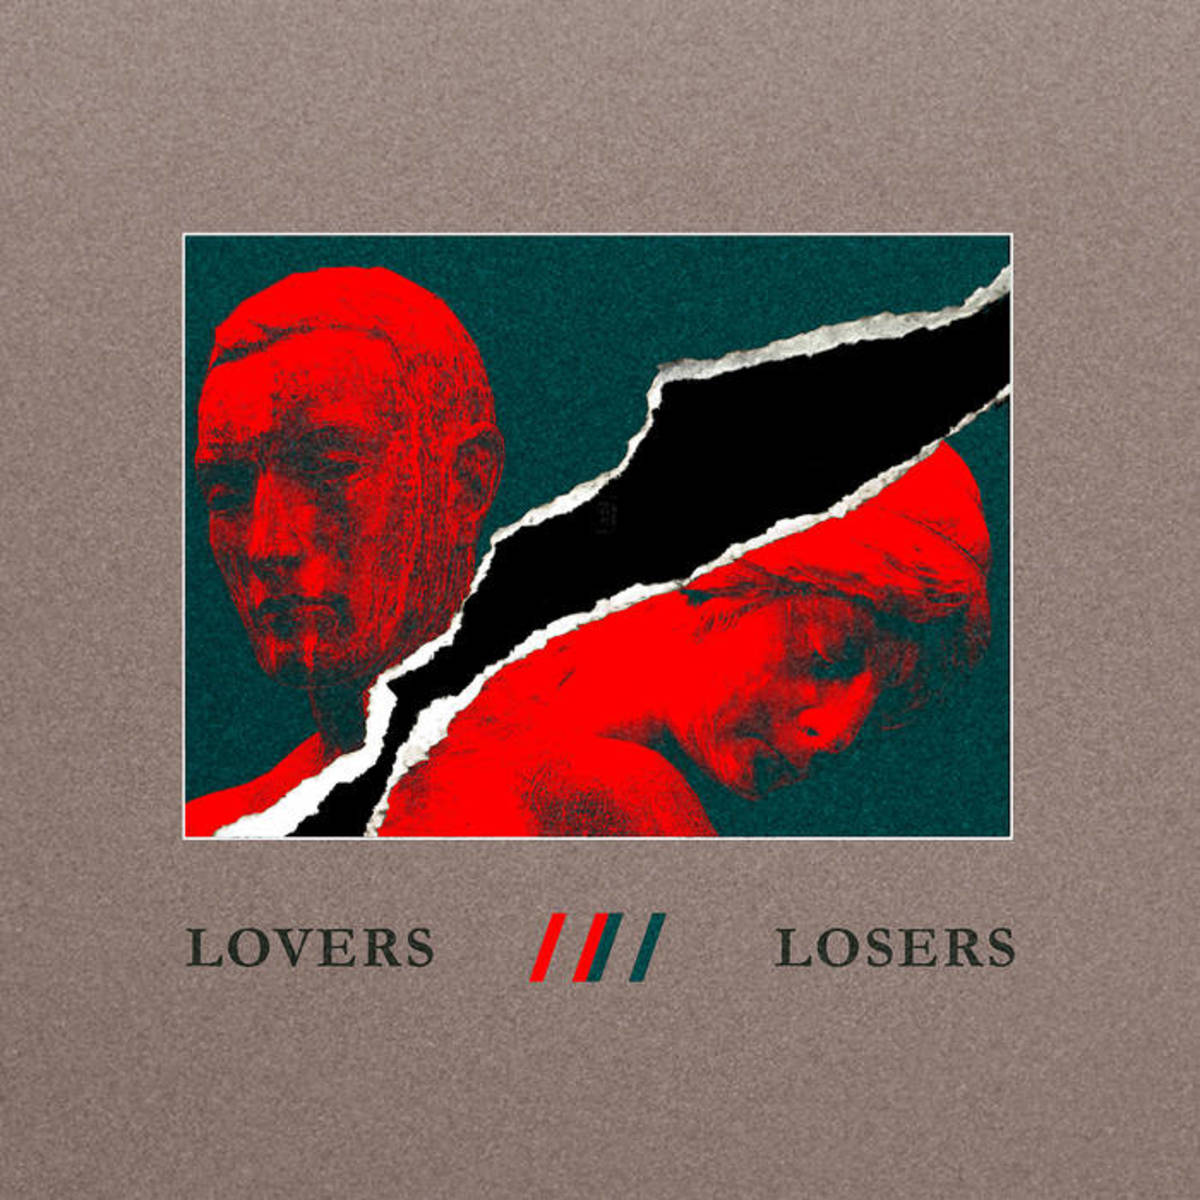 art-pop-maxi-single-review-lovers-and-losers-by-logan-sky-and-steven-jones